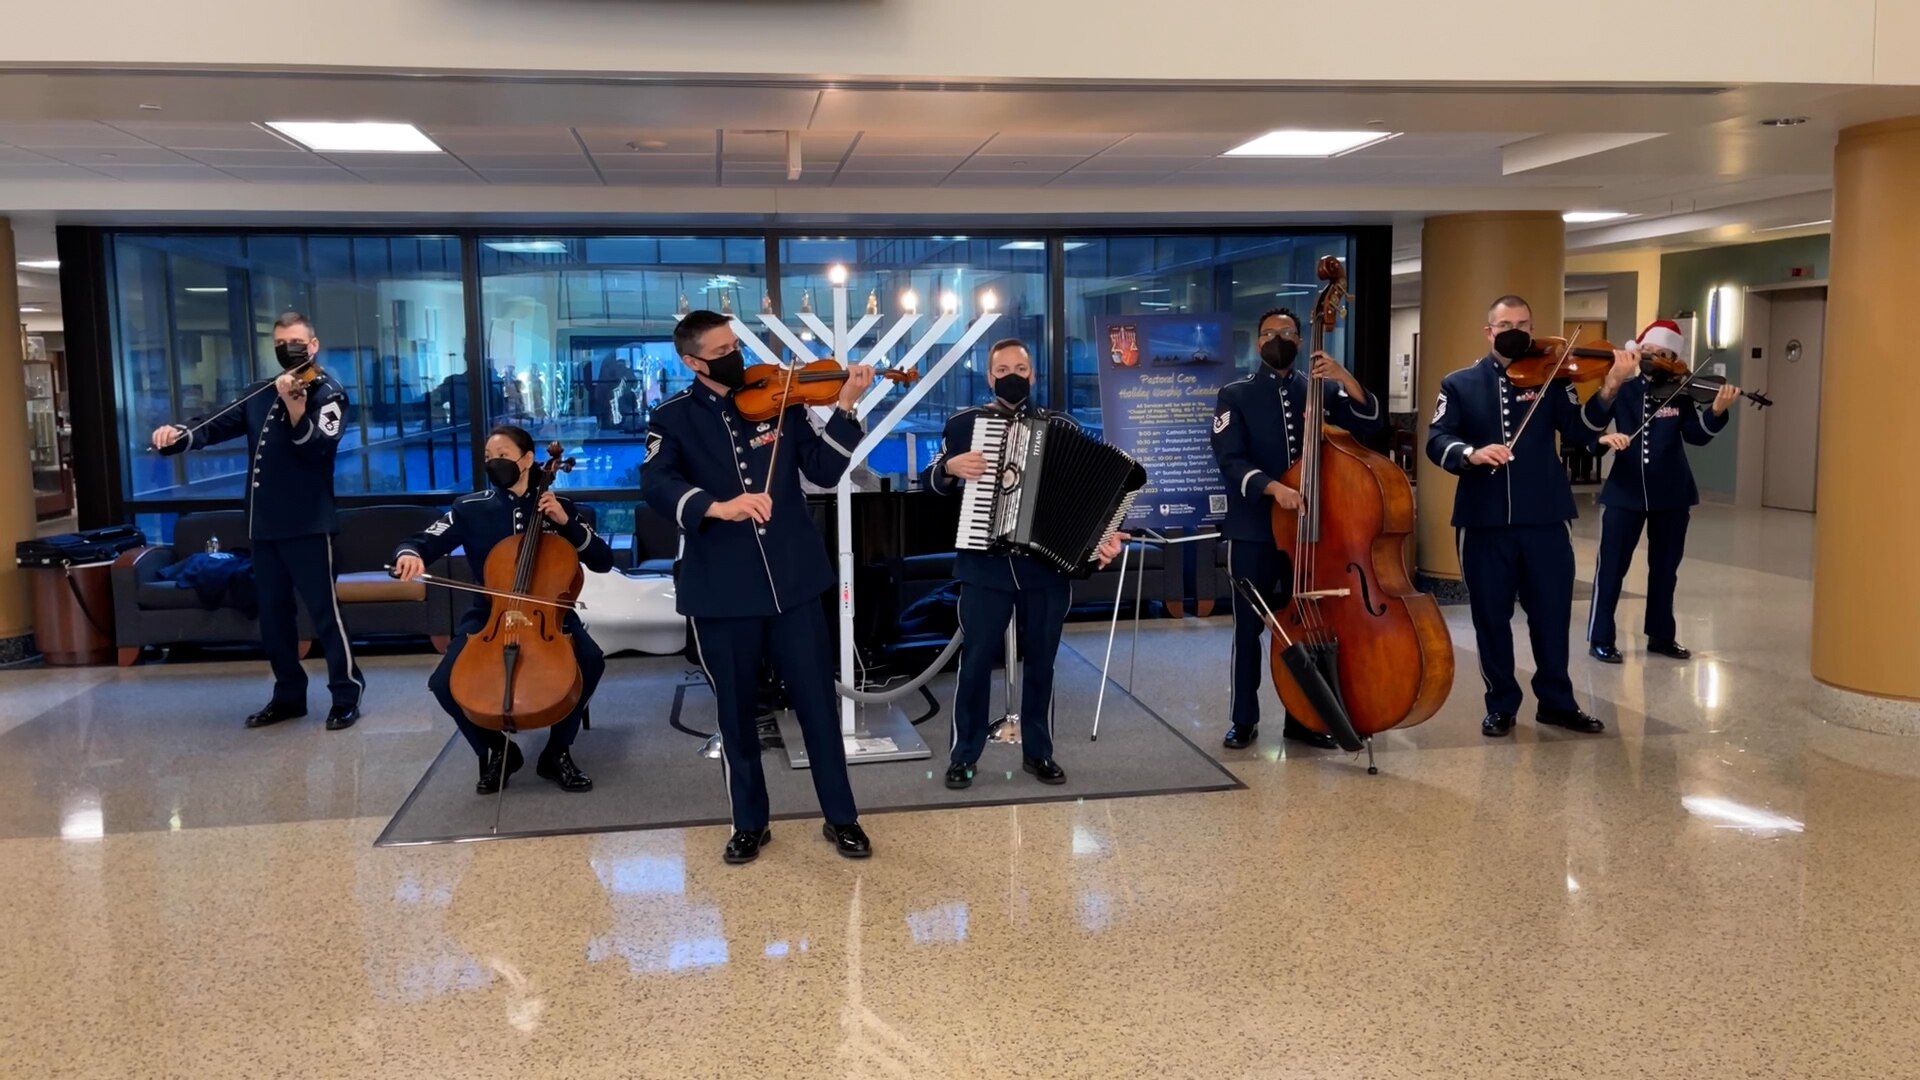 The U.S. Air Force Strings ensemble performed their final concert of the year in the lobby of the America building located in building 19 at Walter Reed National Military Medical Center